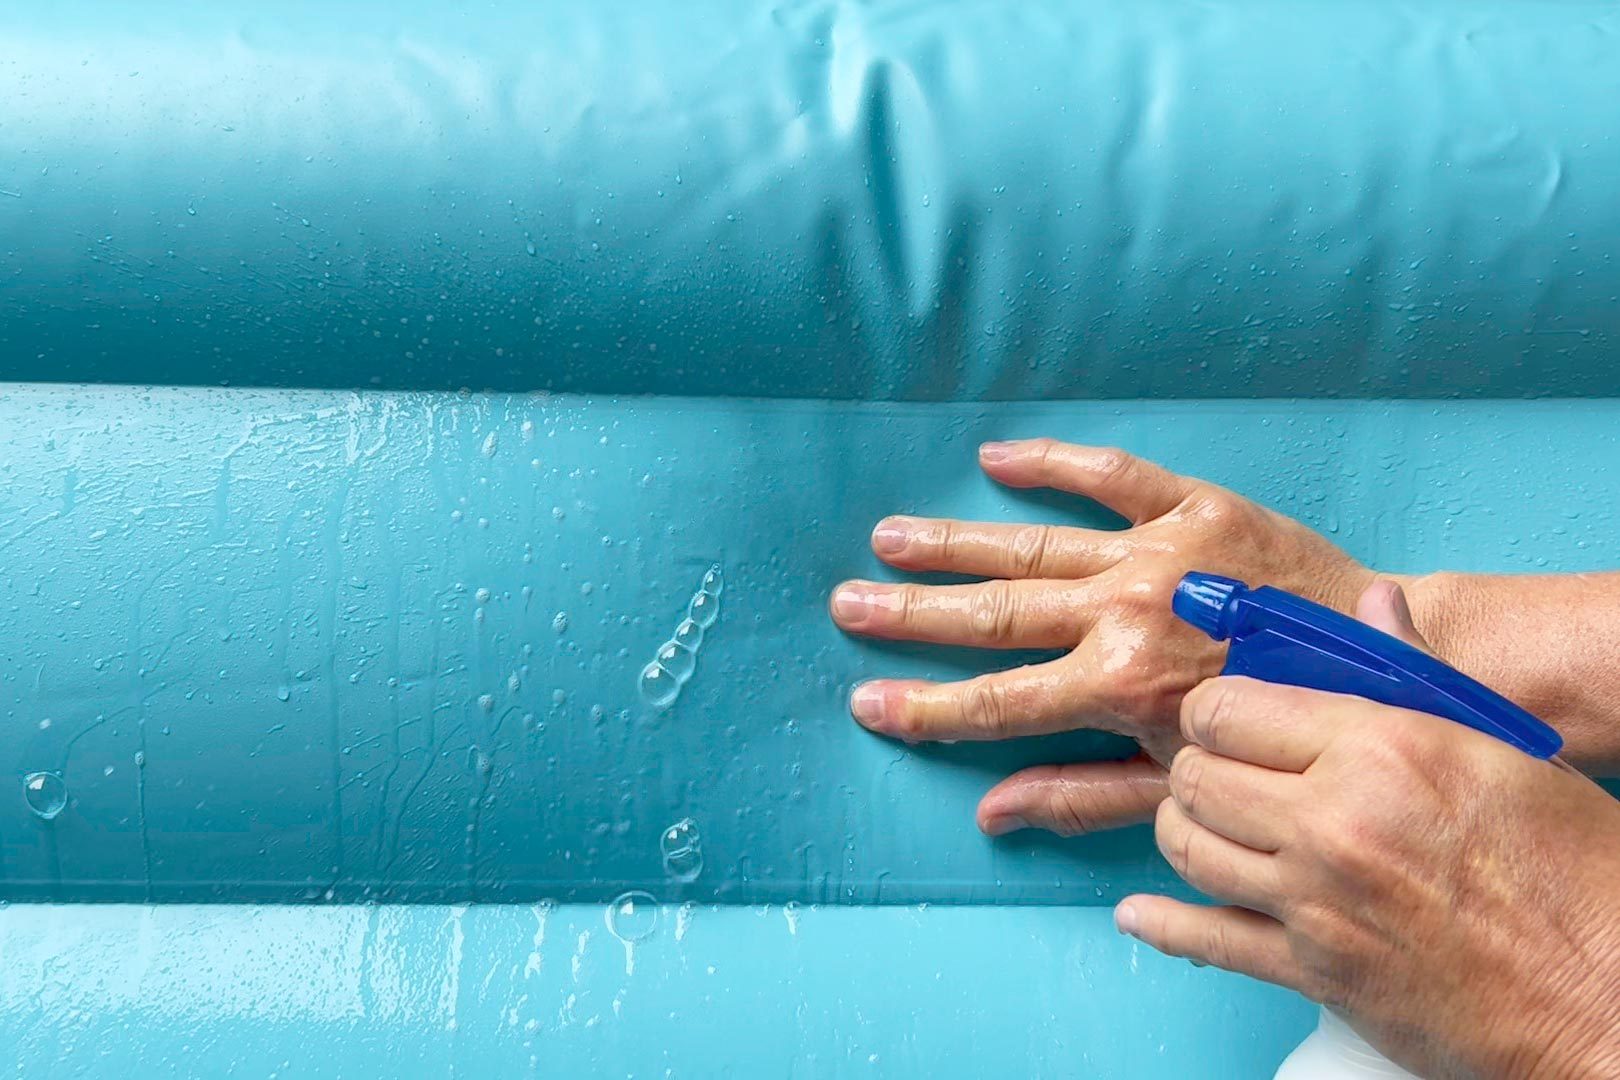 spray mattress with soapy water